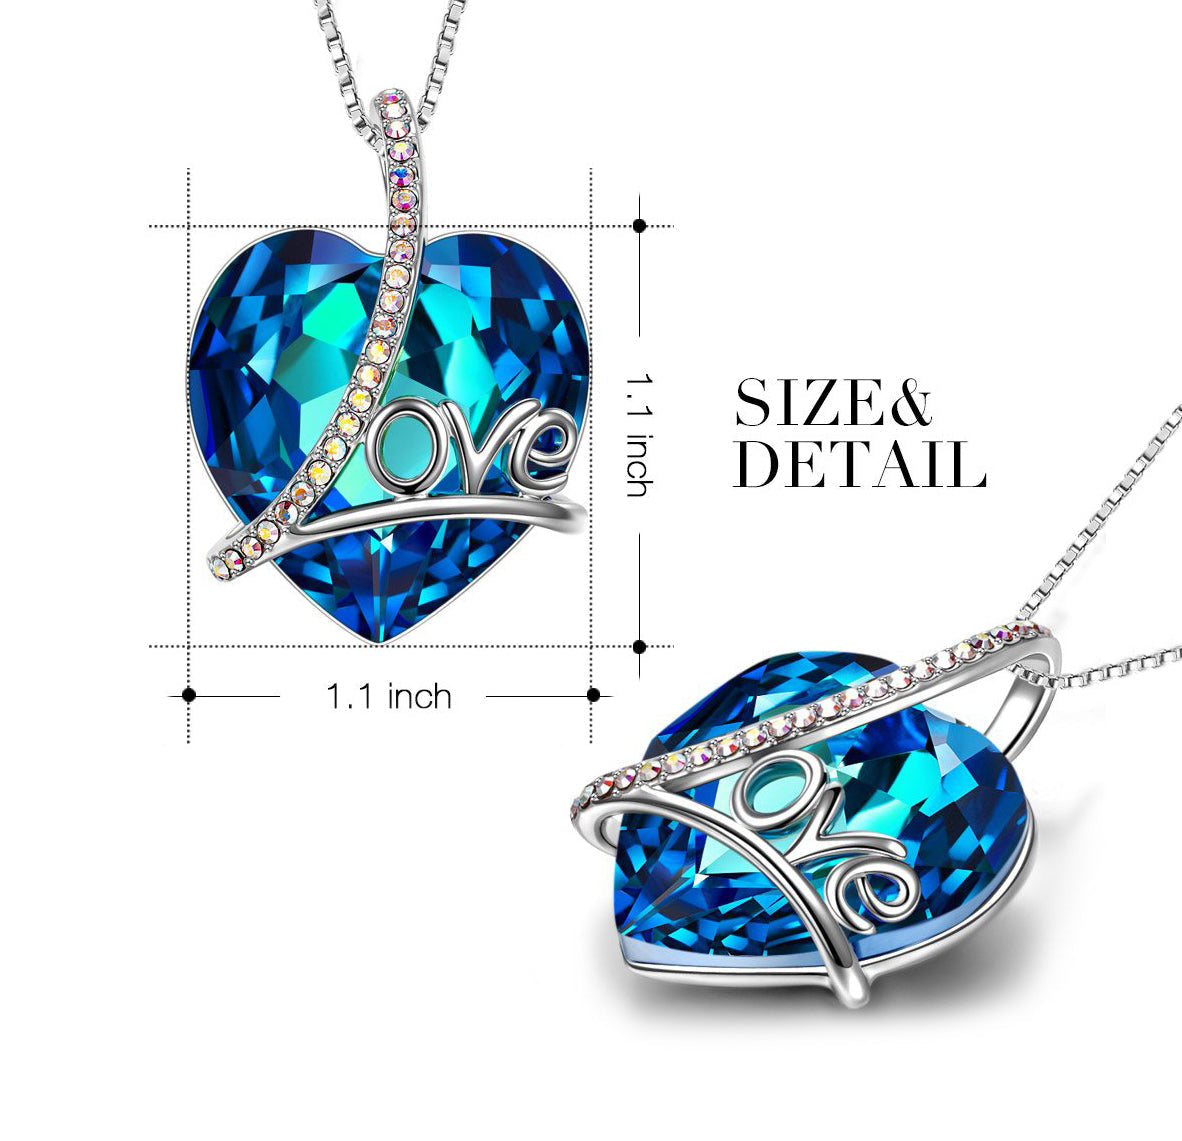 Bermuda Blue Heart Necklace in Rhodium Plating - 18" Chain<br>Cubic Zirconia Stone, Link Chain, Lobster Clasp<br>Lead &amp; Nickel Free, Perfect for All Occasions Bijou Her